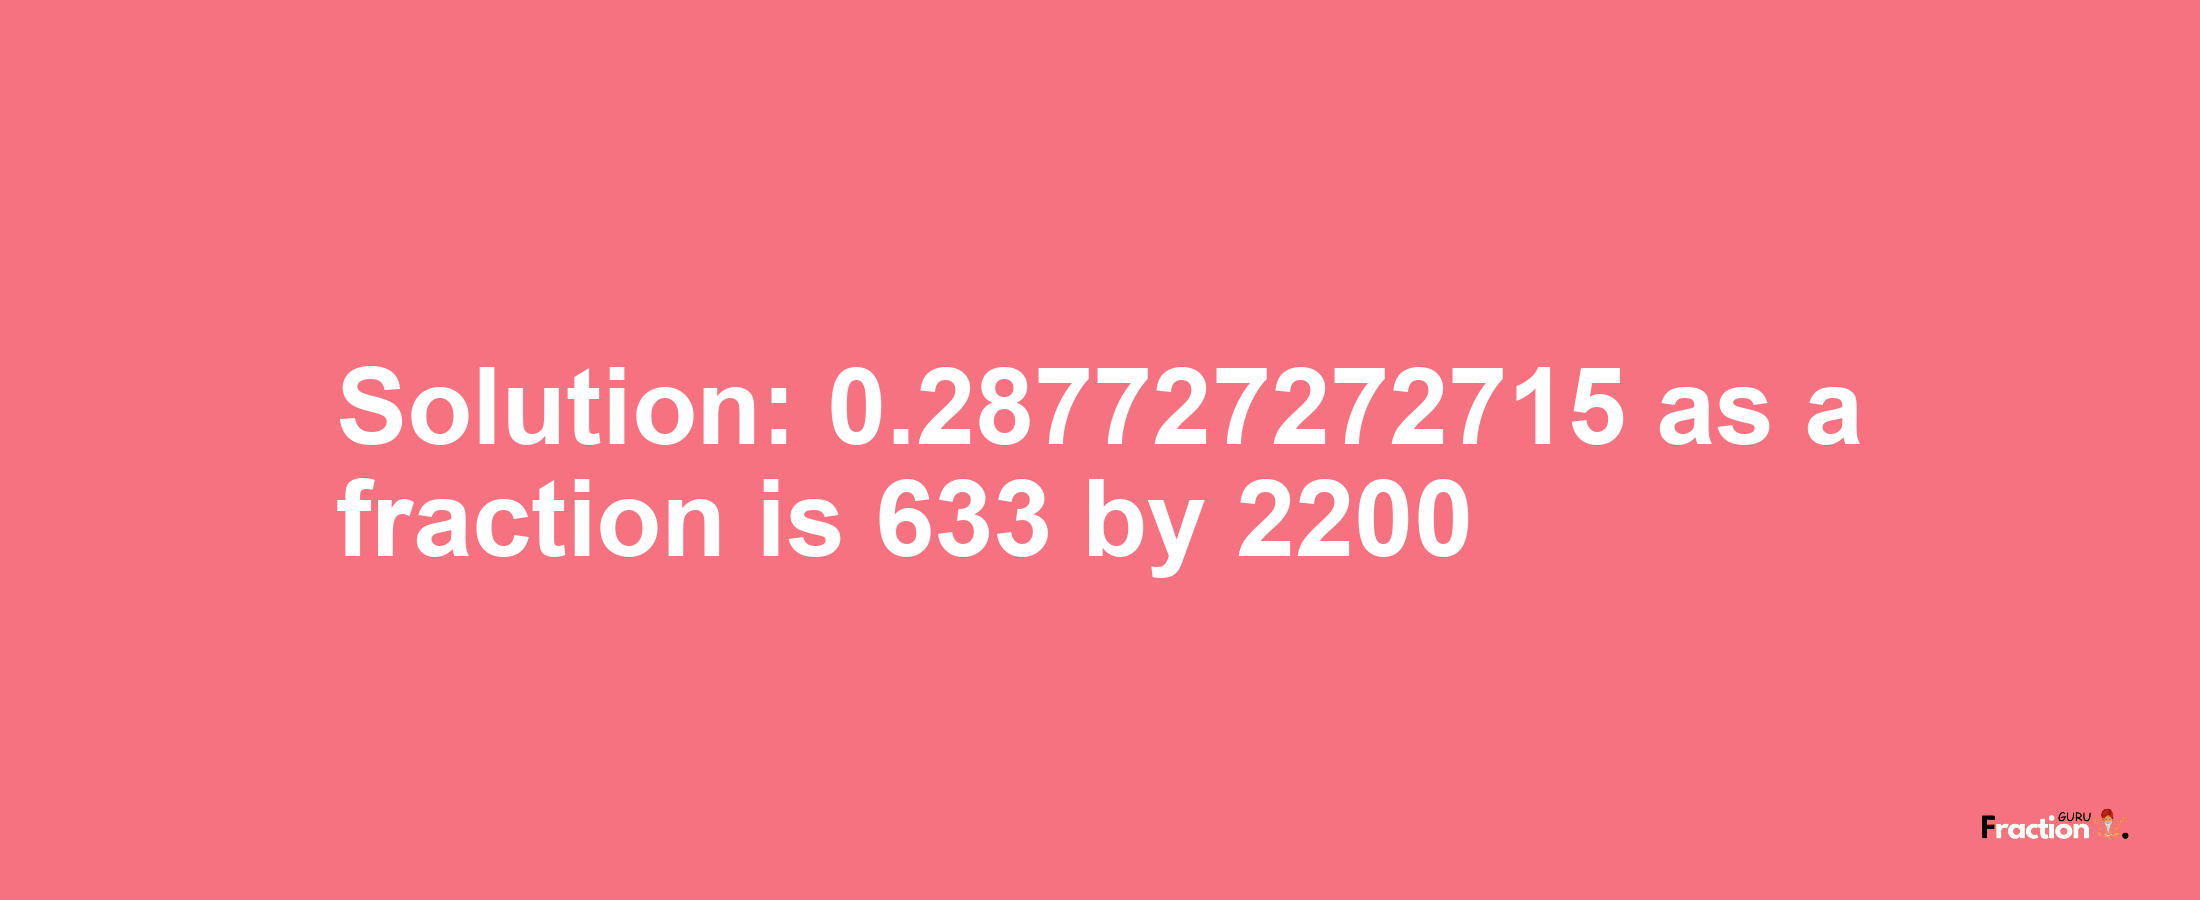 Solution:0.287727272715 as a fraction is 633/2200